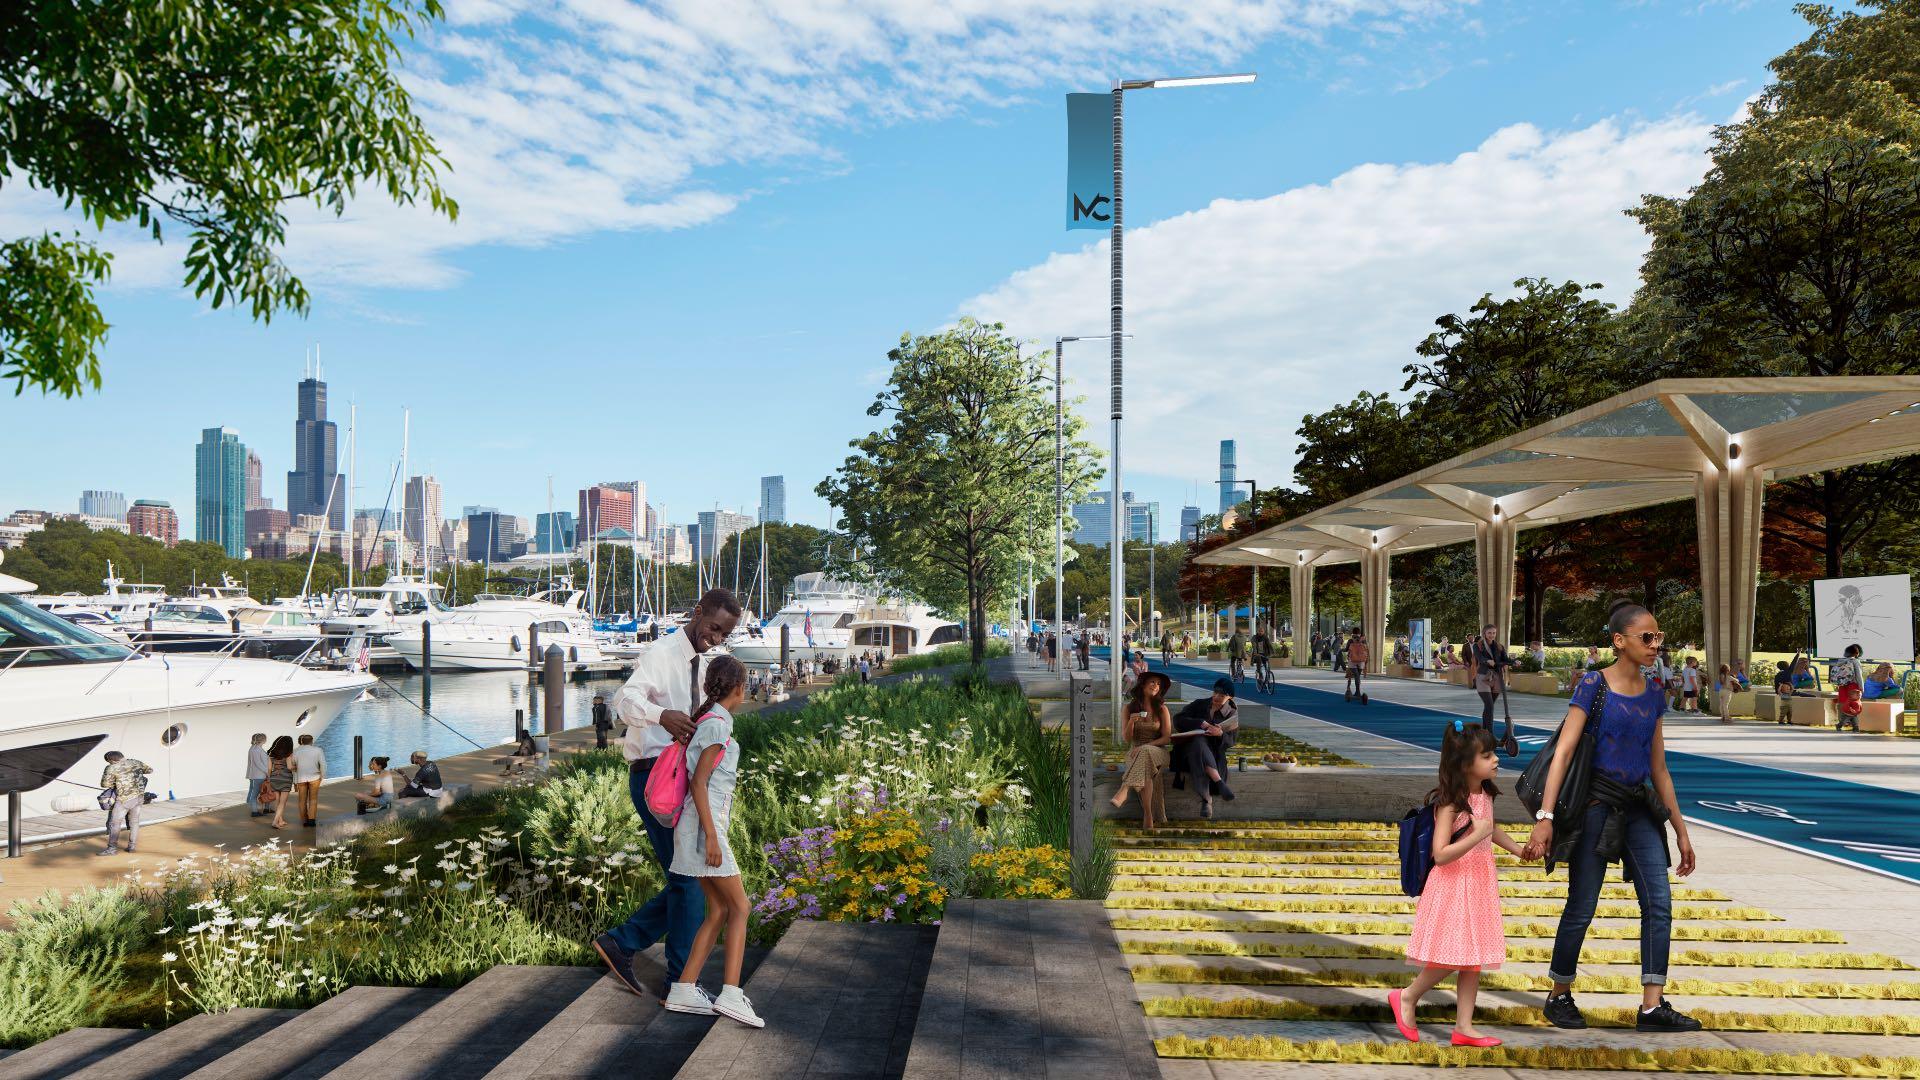 A rendering of a proposed walkway at Burnham Harbor demonstrates permeable pavement options. (City of Chicago)